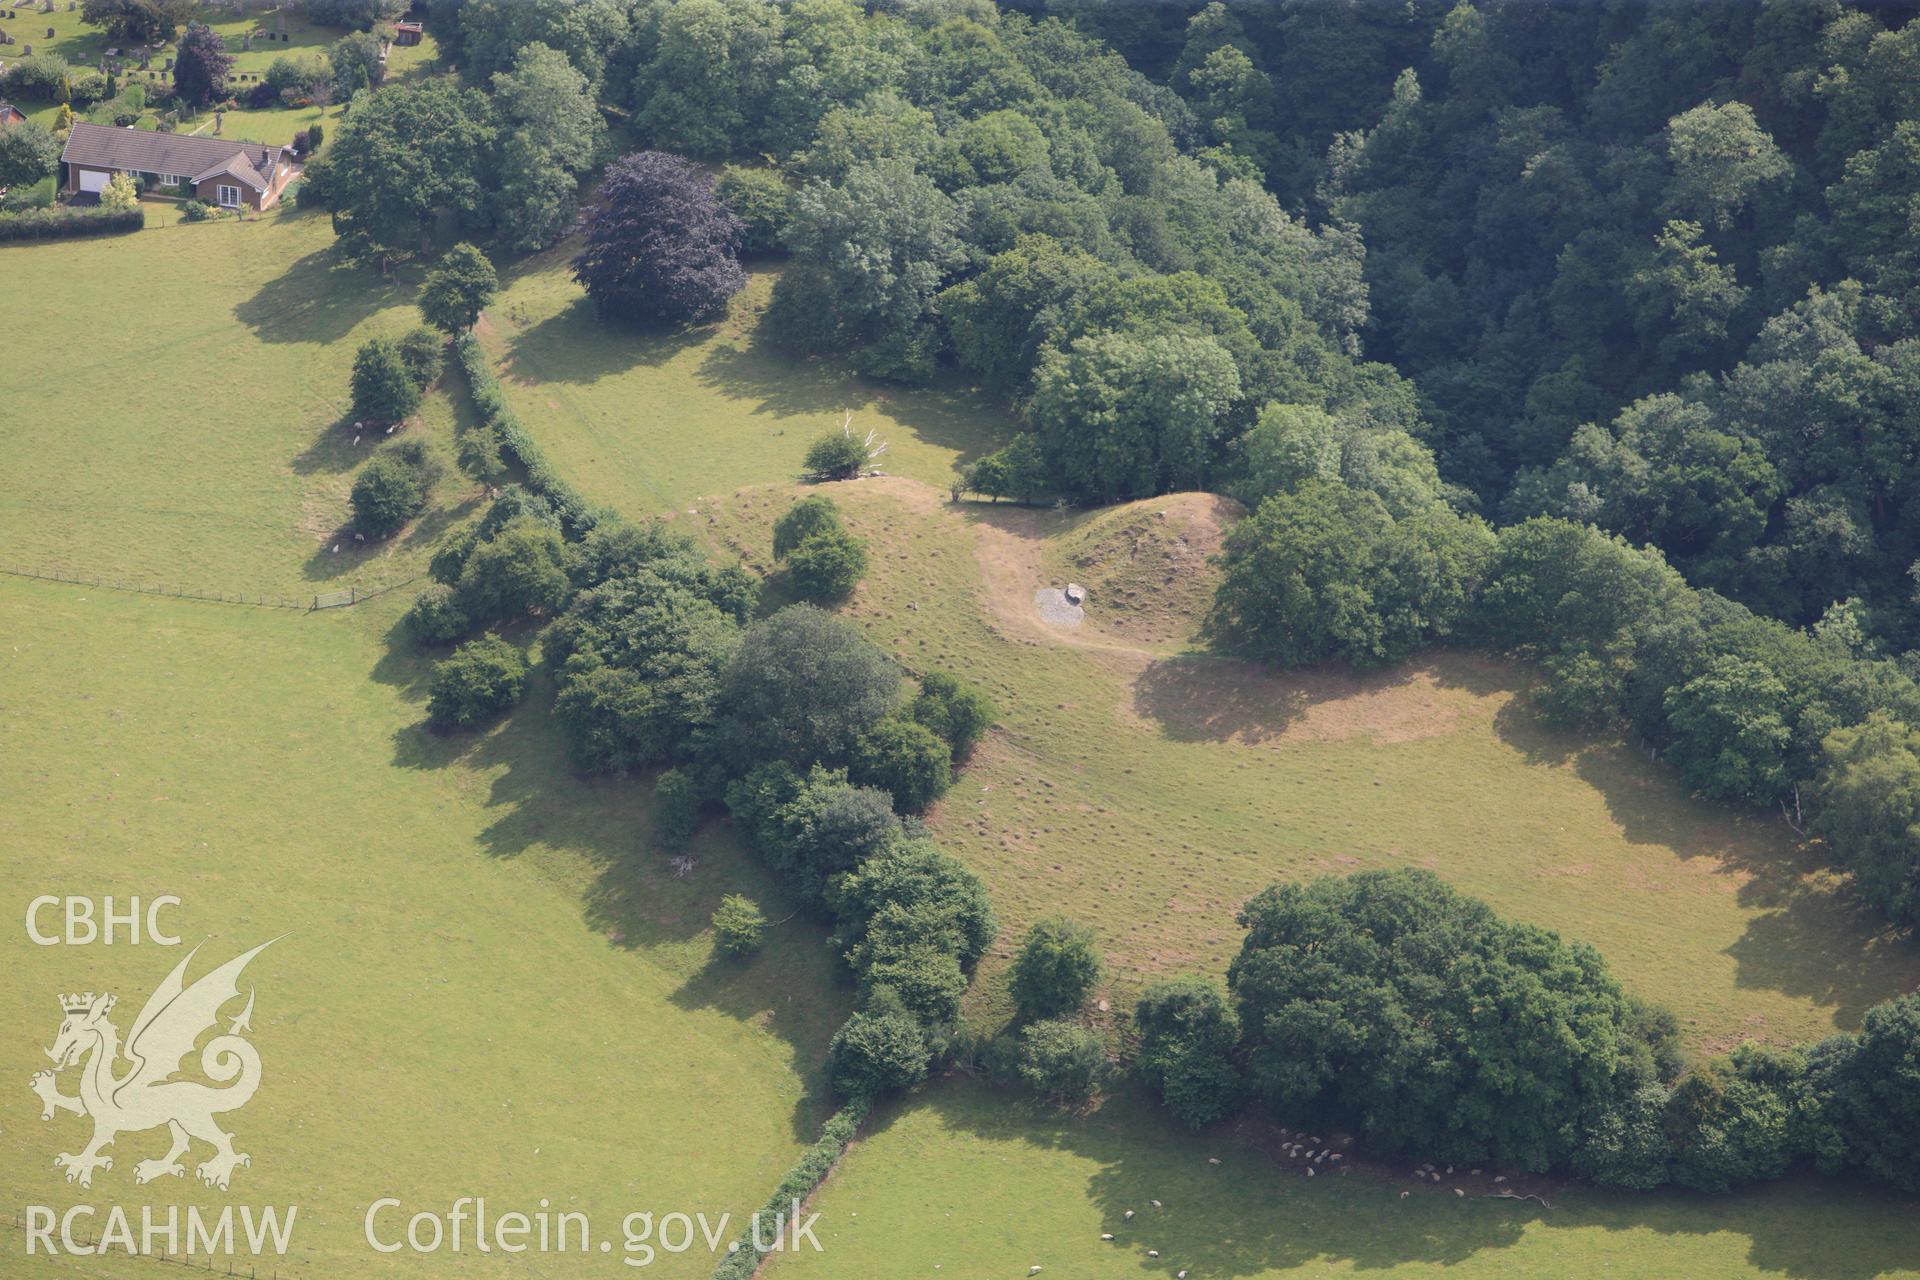 Aberedw Castle Mound, south east of Builth Wells. Oblique aerial photograph taken during the Royal Commission?s programme of archaeological aerial reconnaissance by Toby Driver on 1st August 2013.